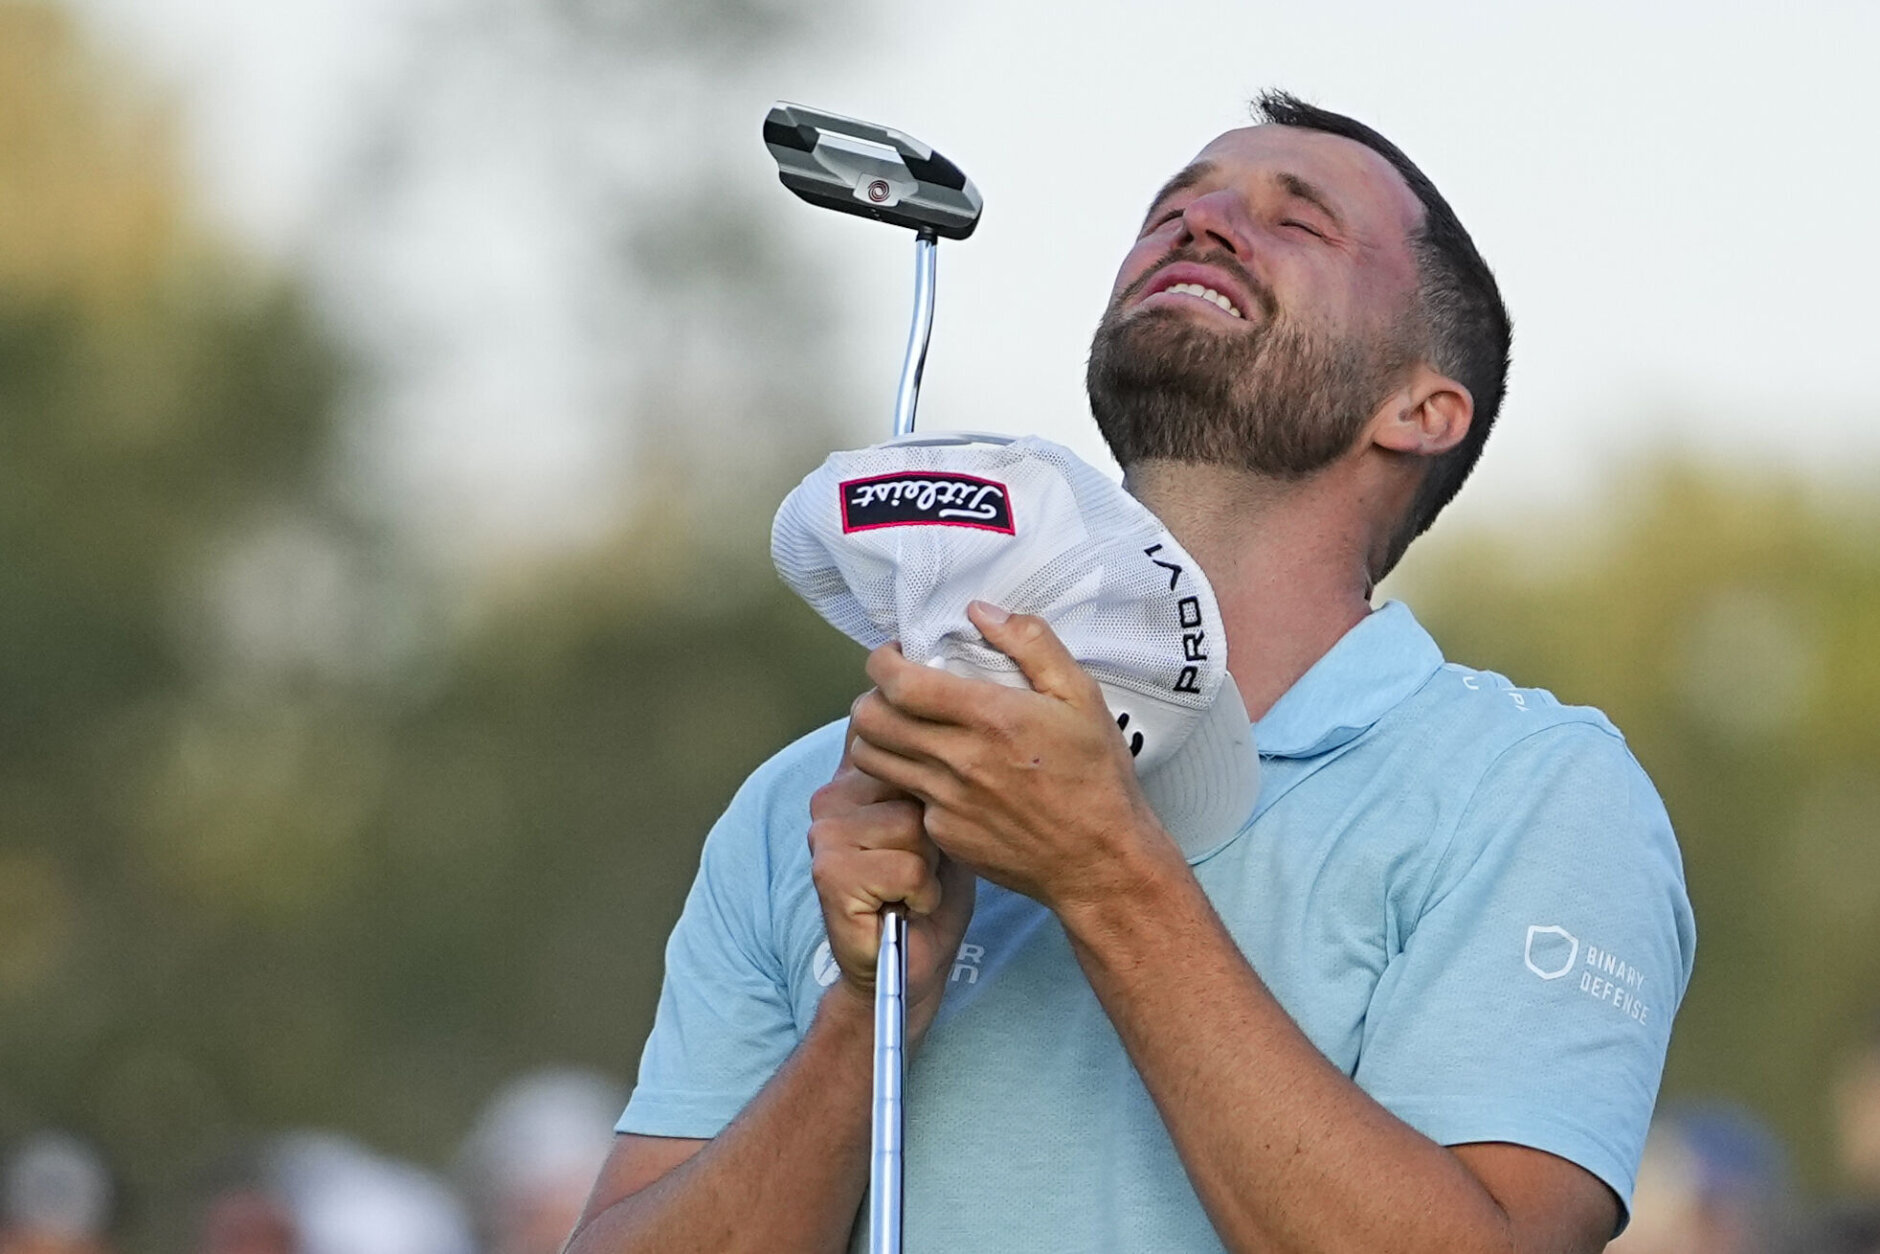 Wyndham Clark celebrates on the 18th hole after winning the U.S. Open golf tournament at Los Angeles Country Club on Sunday, June 18, 2023, in Los Angeles. (AP Photo/Matt York)